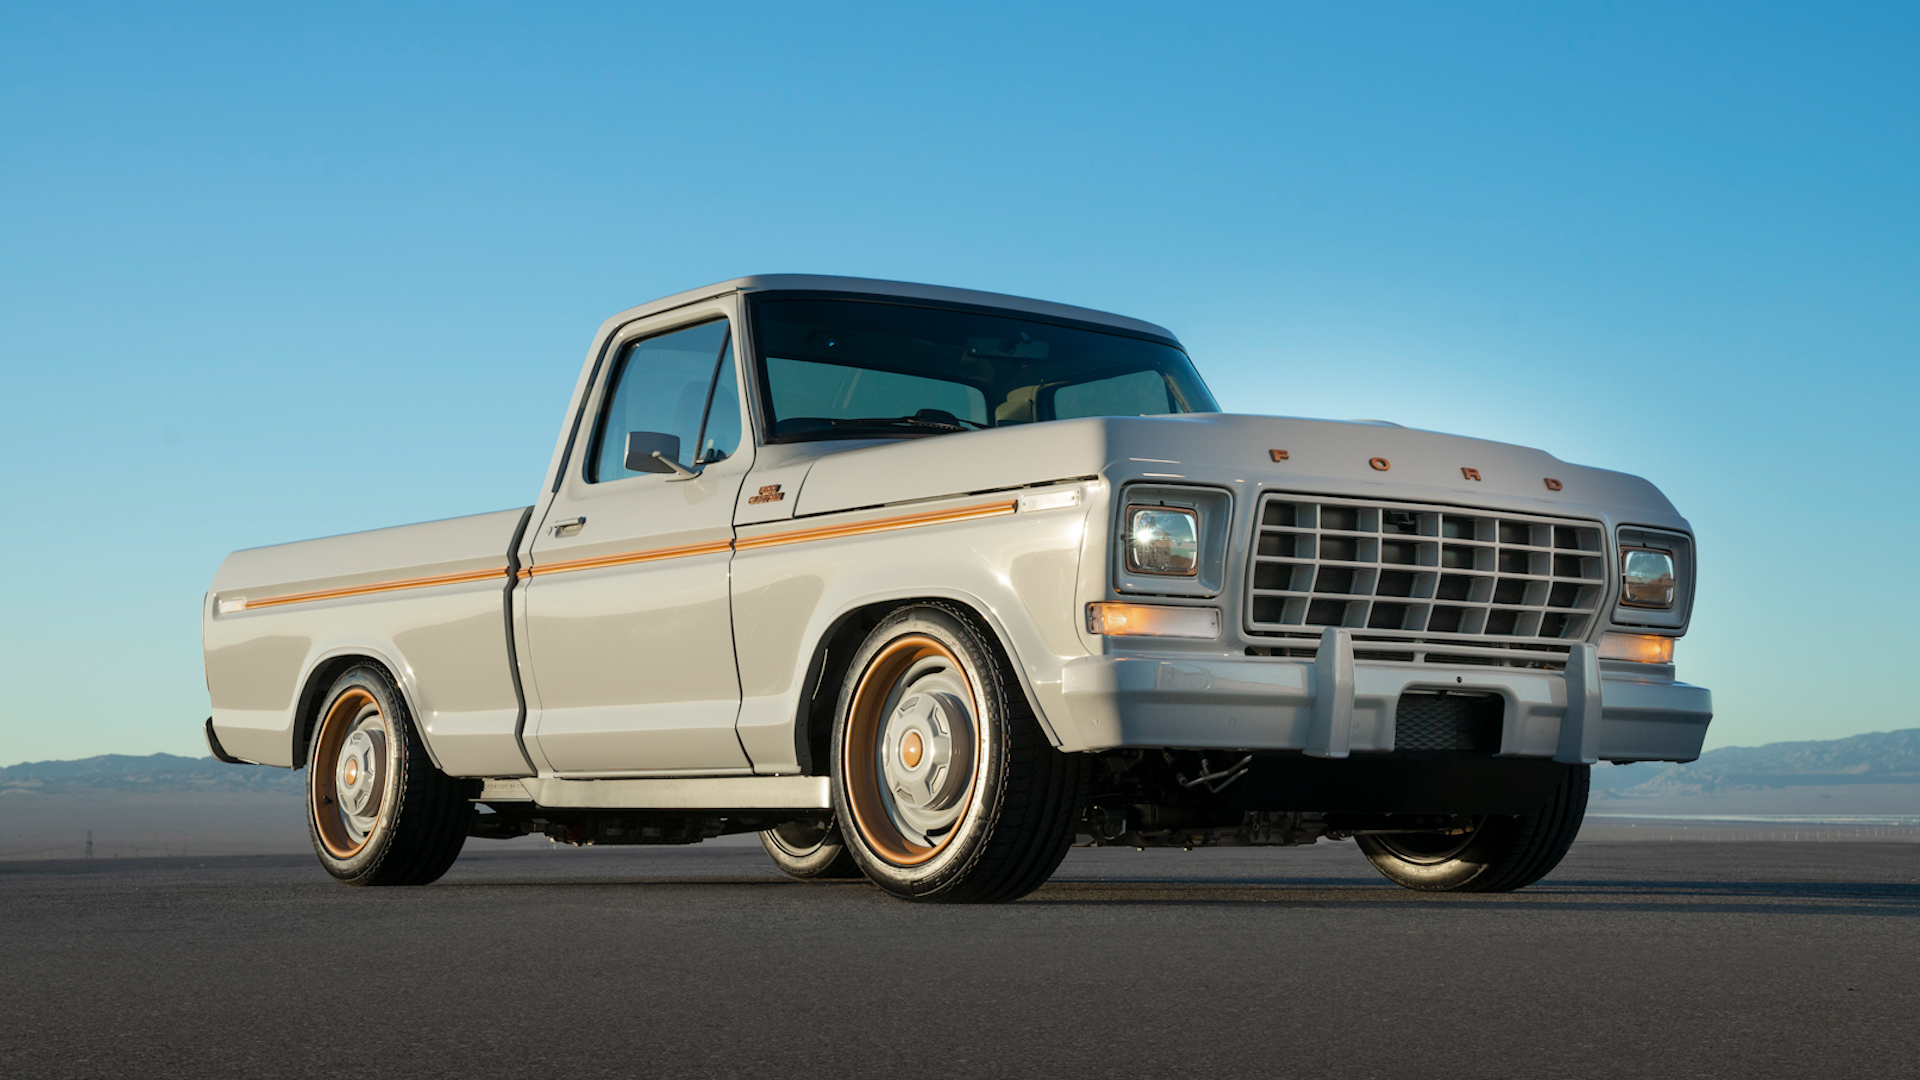 A classic Ford pickup truck gets an allelectric restomod